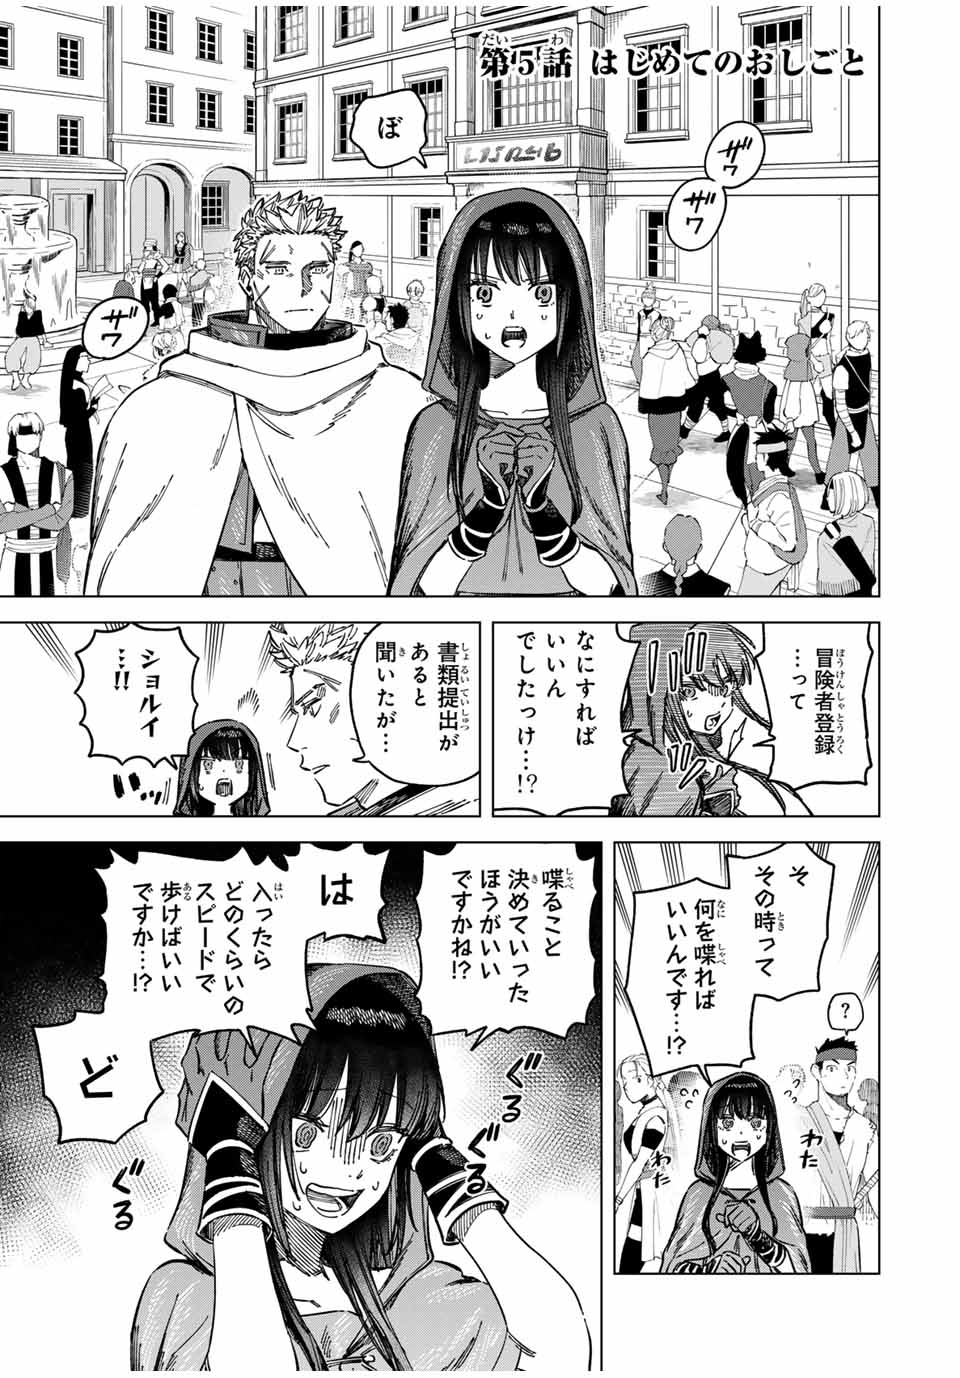 Witch and Mercenary 魔女と傭兵 第5.1話 - Page 1